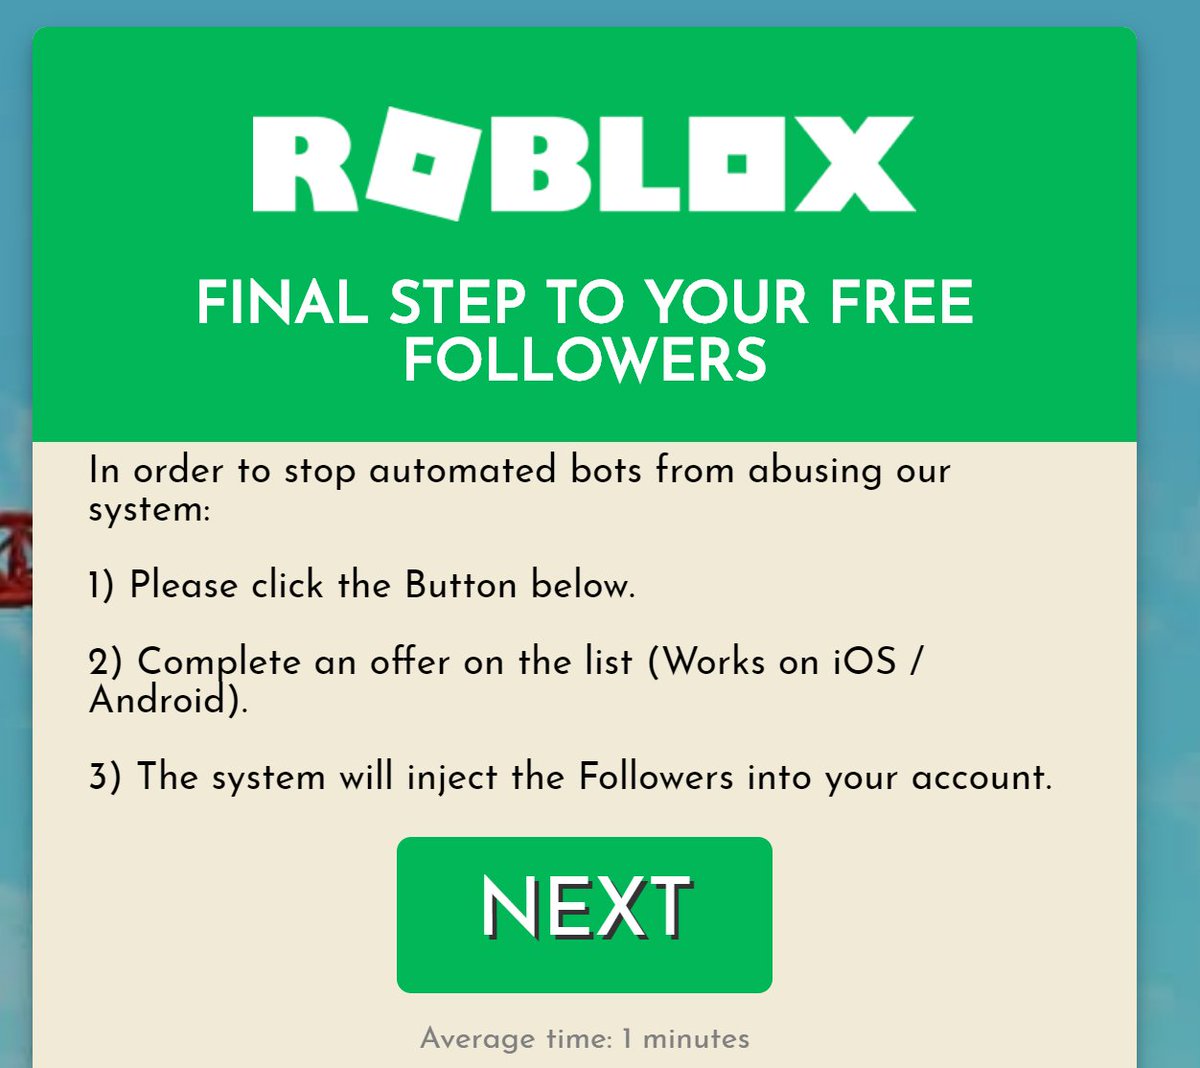 Code Rainway En Twitter Watch Out For This New Scam - robux scam site